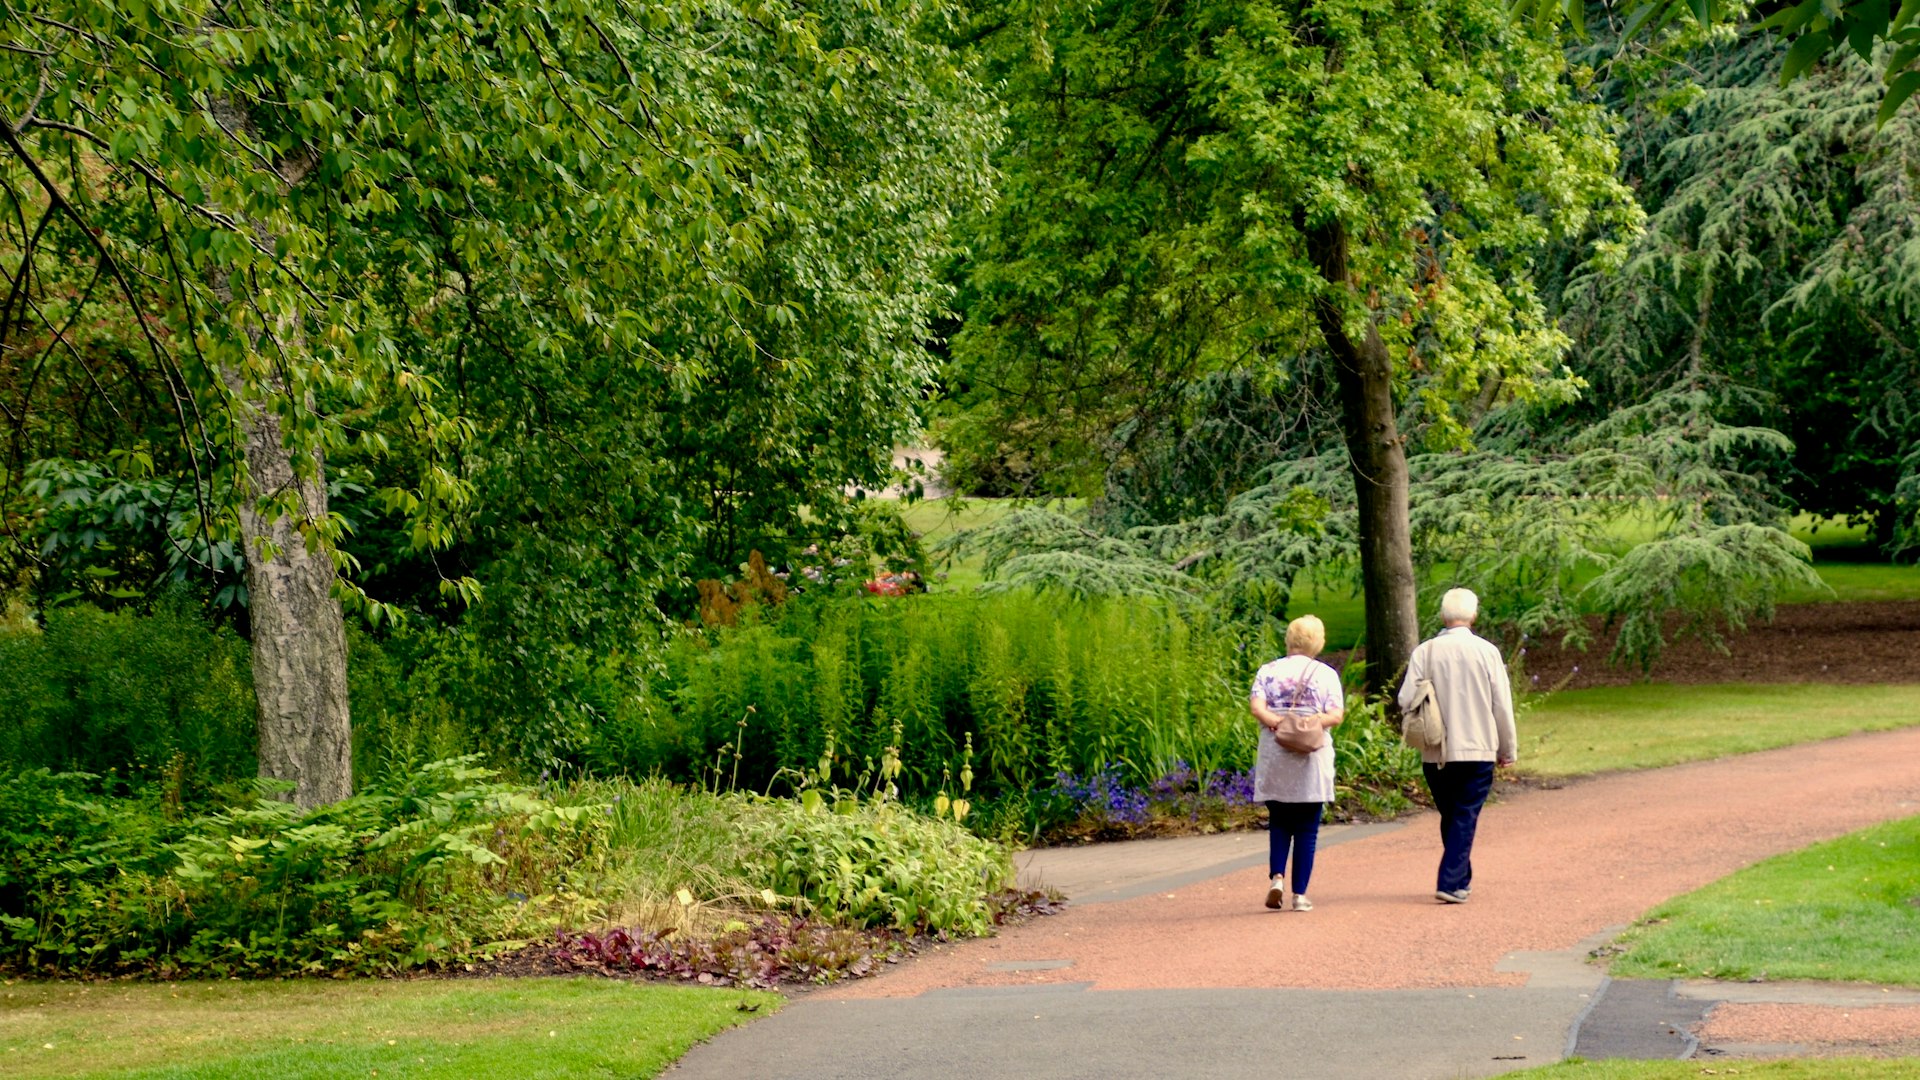 An elderly couple with their backs to the camera walk down a path through pristine gardens